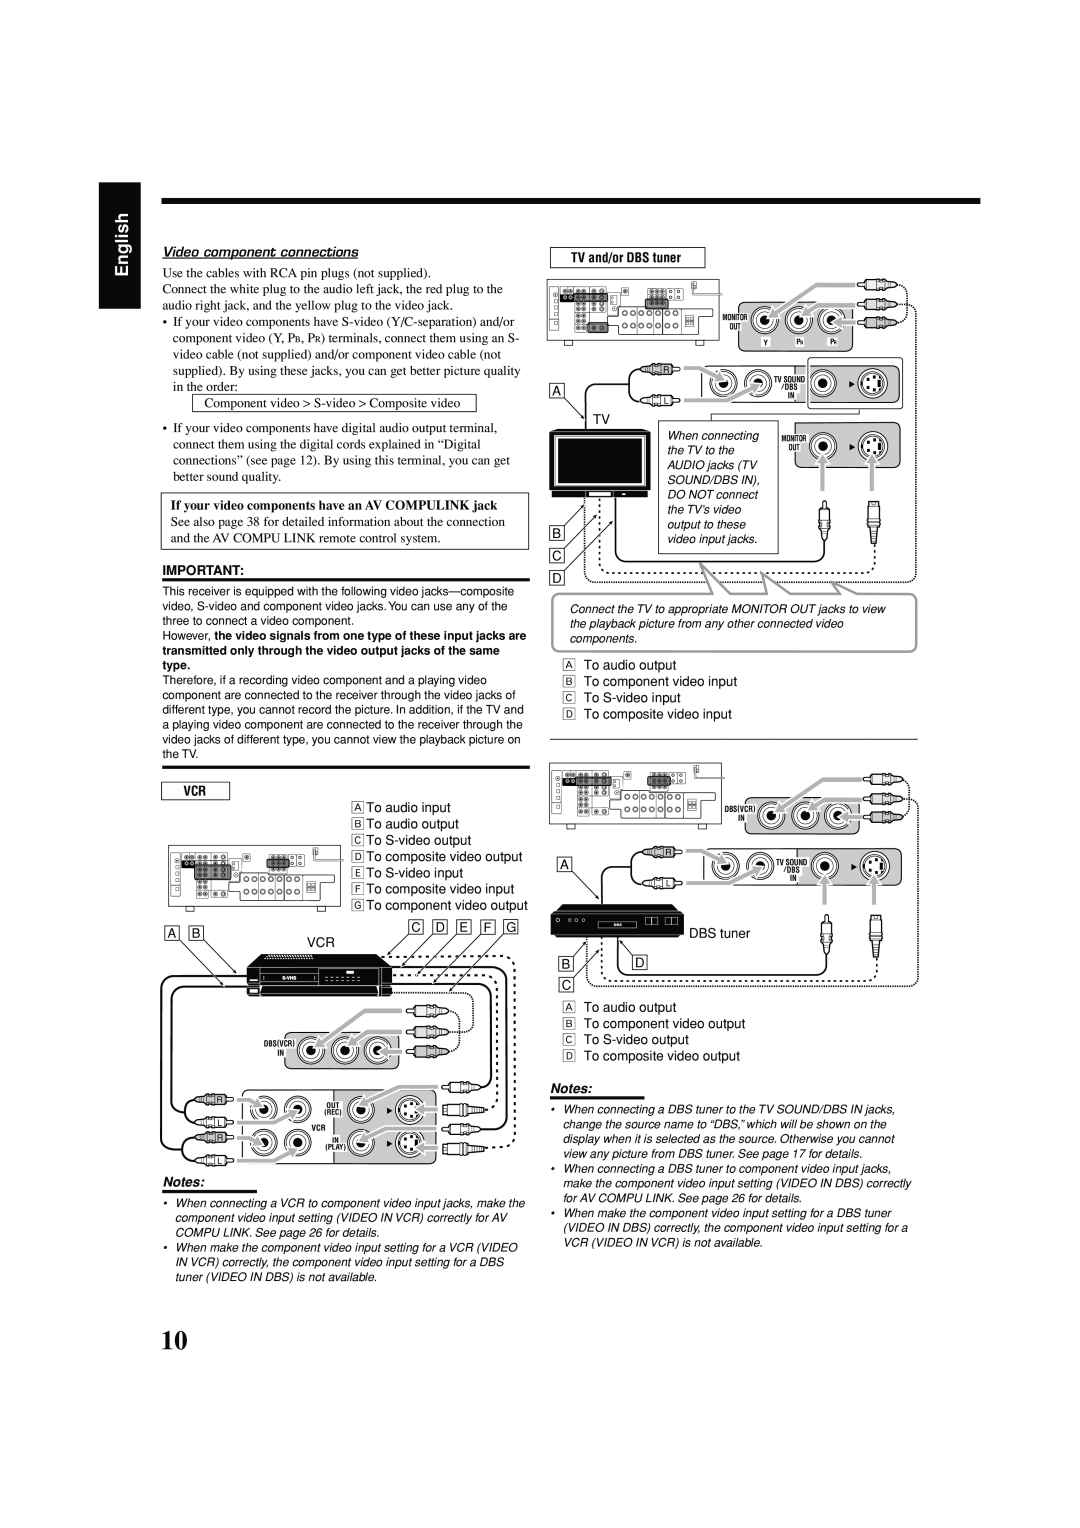 JVC RX-7042S, RX-7040B manual English, Video component connections, TV and/or DBS tuner, Notes 